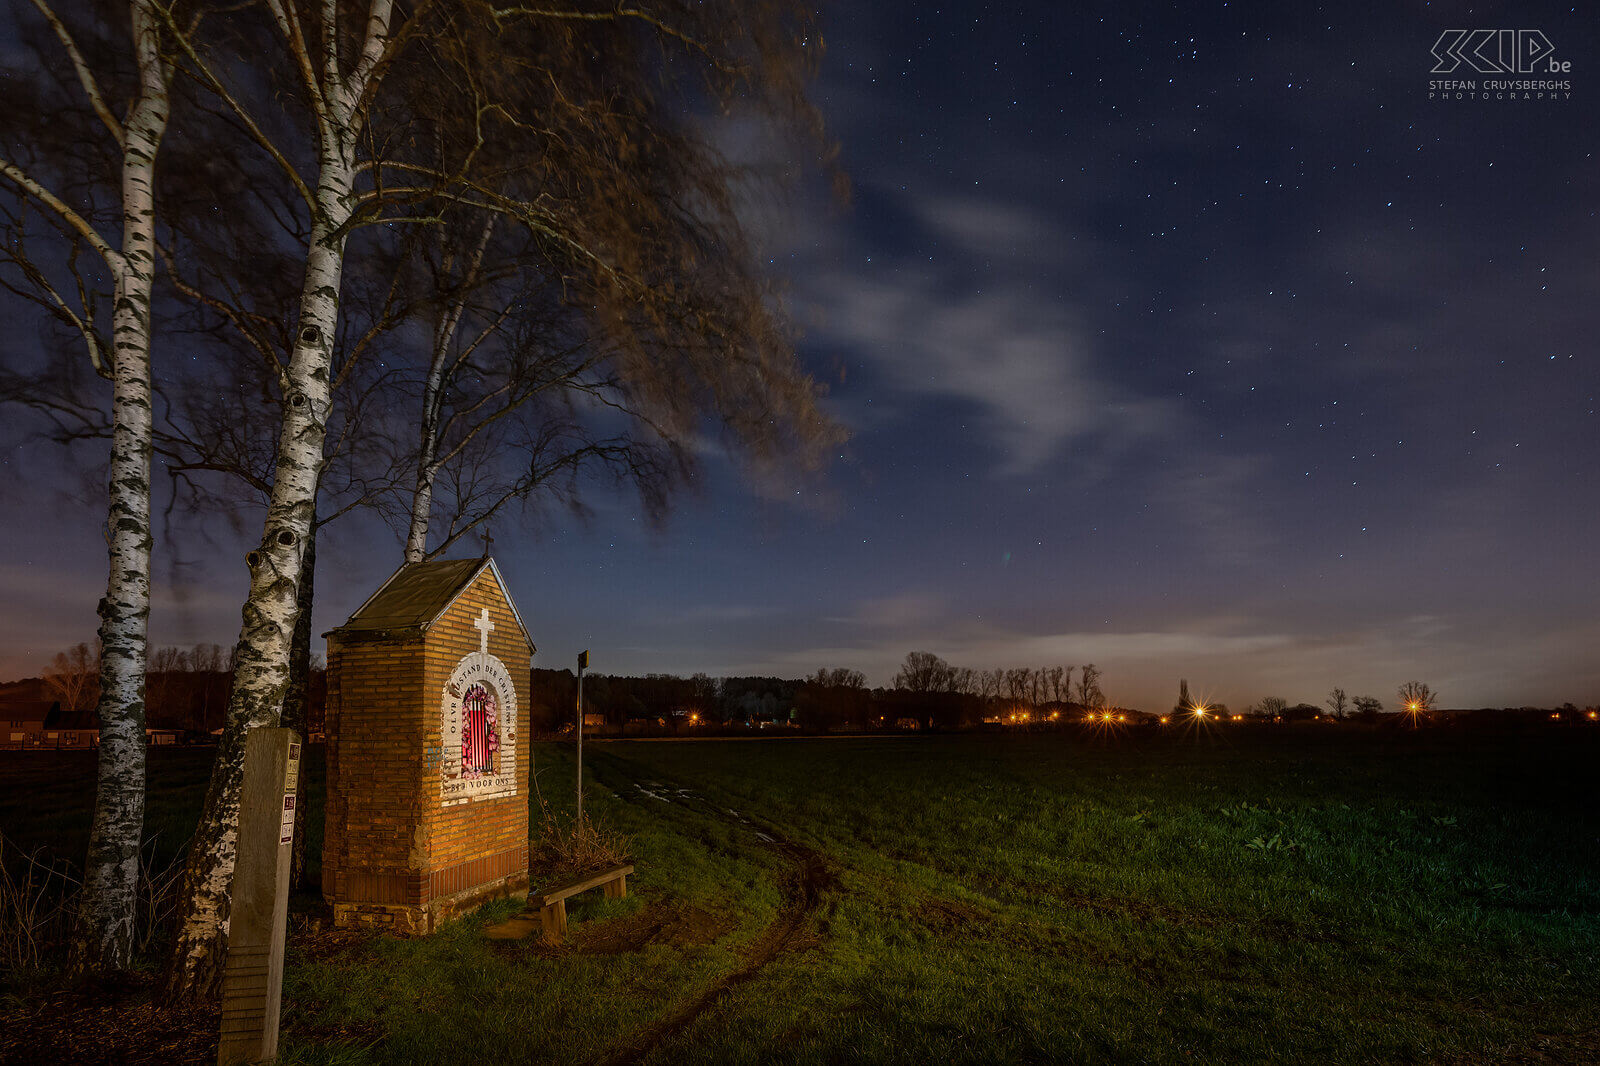 Hageland by night - Chapel of Our Lady of Assistance in Rillaar The Chapel of Our Lady of Assistance in Rillaar (Aarschot) during the blue hour and with a full moon. The chapel was built in 1948 and is surrounded by four birch trees. Stefan Cruysberghs